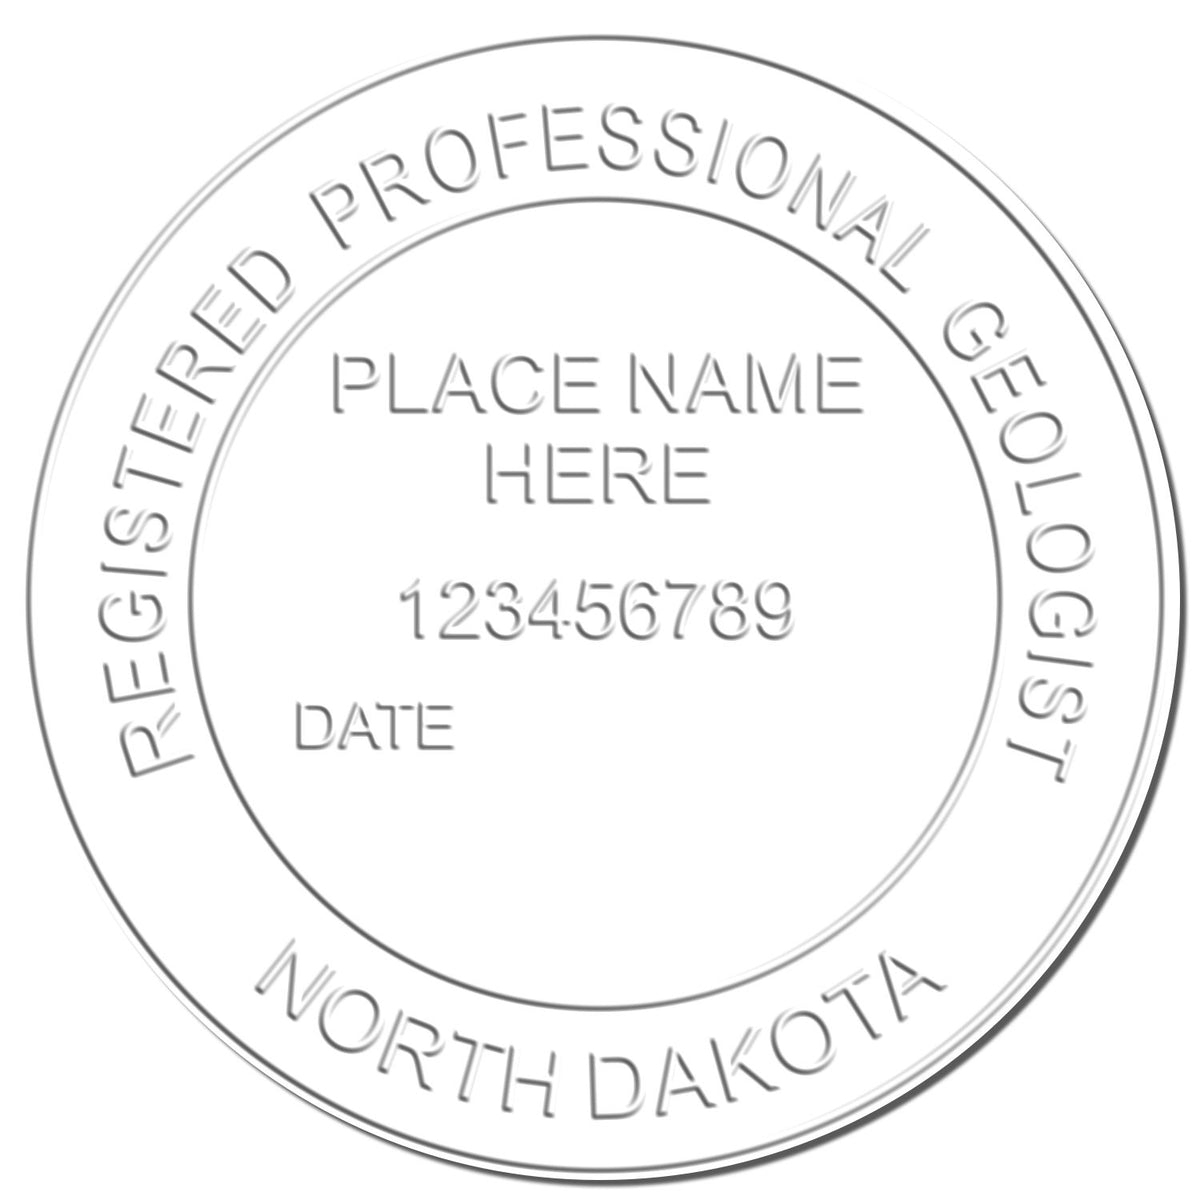 A stamped imprint of the Gift North Dakota Geologist Seal in this stylish lifestyle photo, setting the tone for a unique and personalized product.